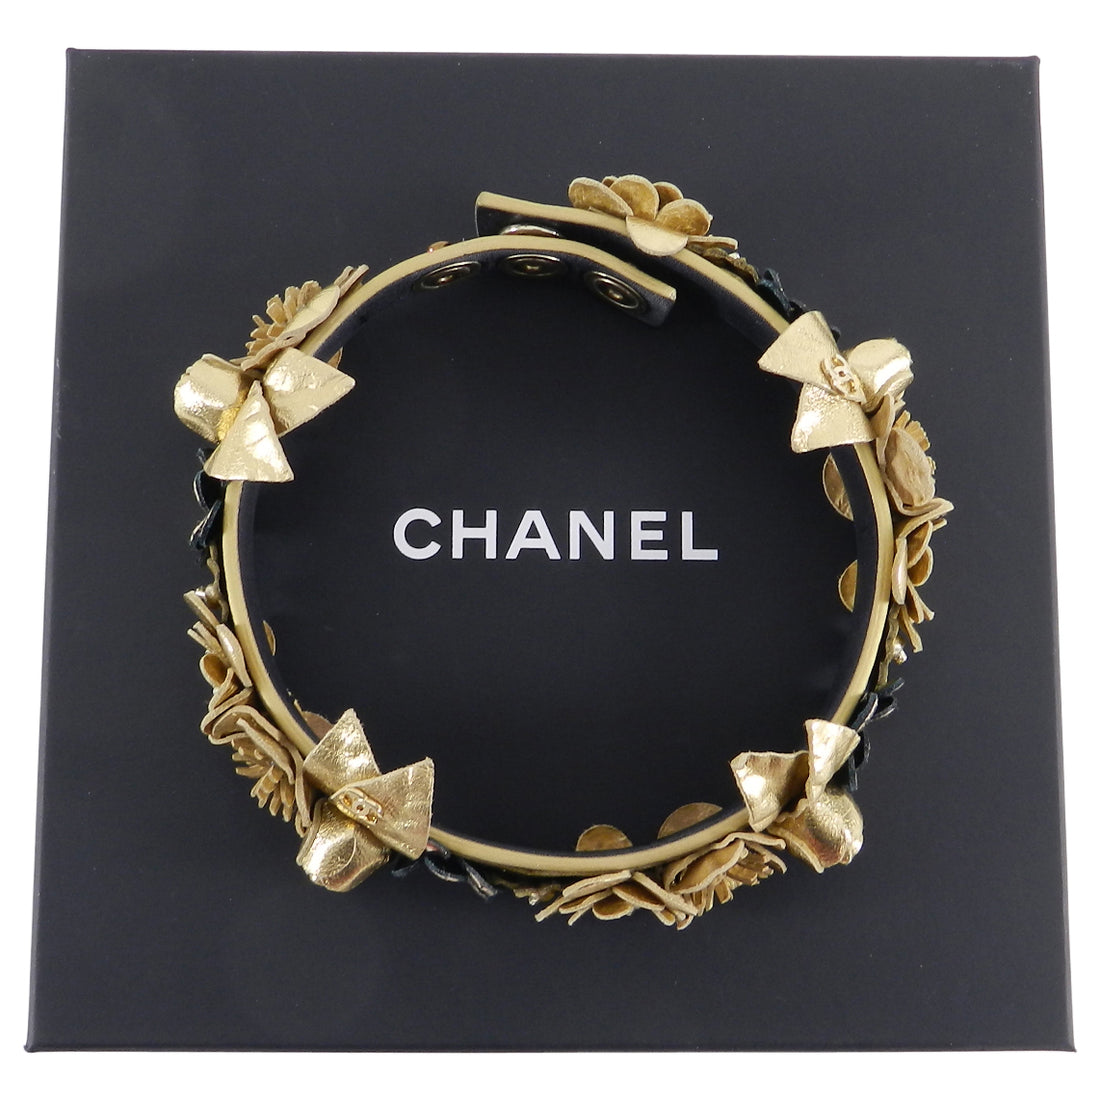 Chanel Jewelry Headband/Necklace CC Choker with Black Leather, Gold Tone,  New in Box GA001